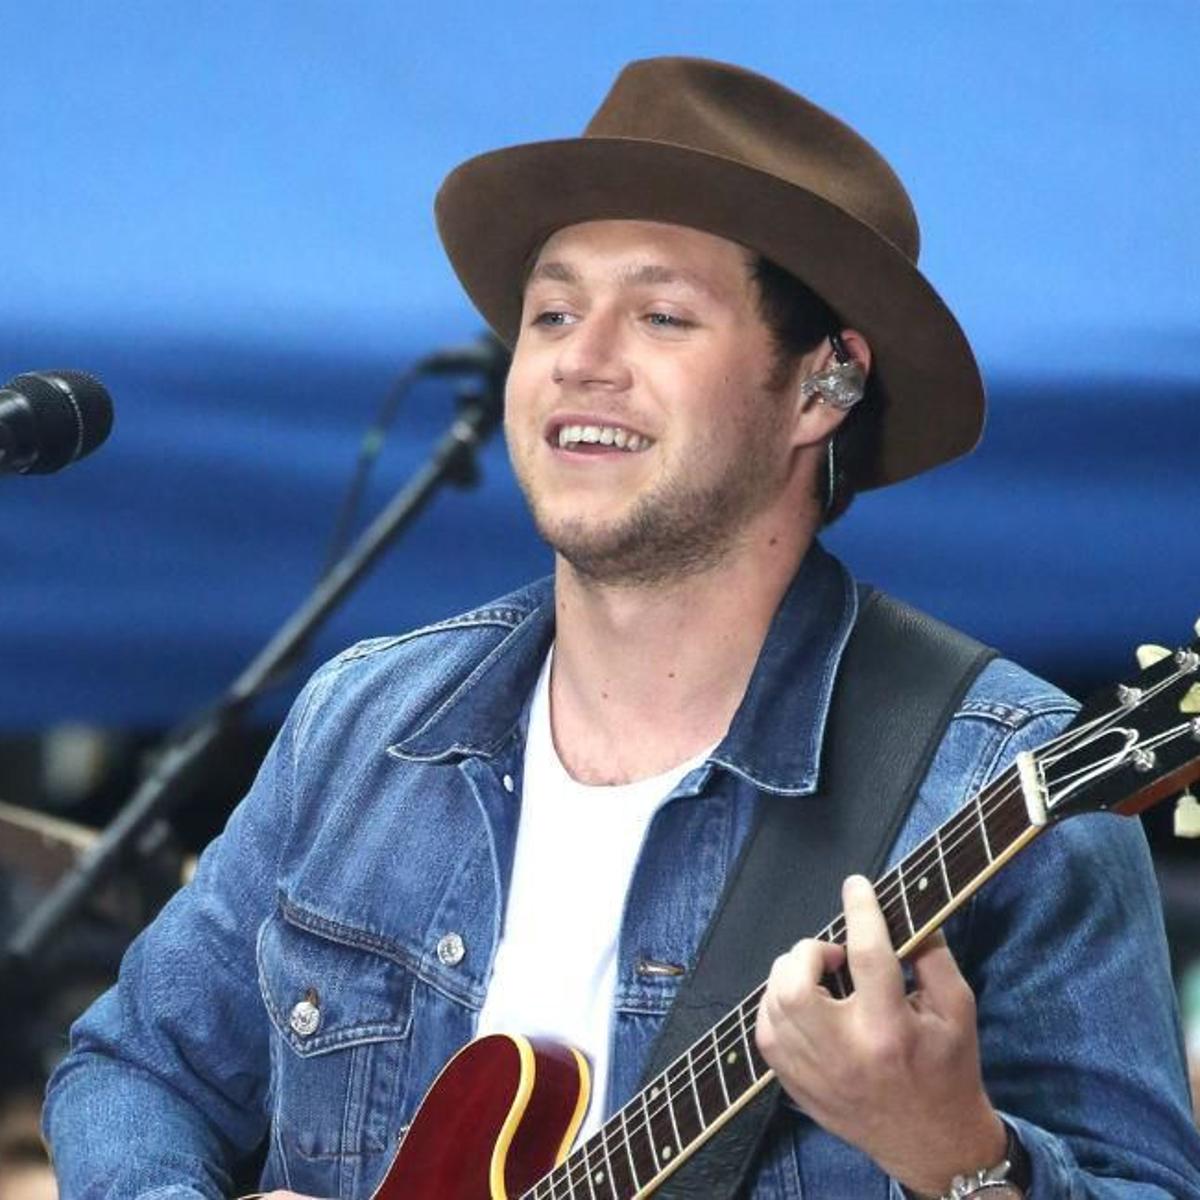 Niall Horan announces New music " Nice To Meet Ya" - Fans reactions and Release date